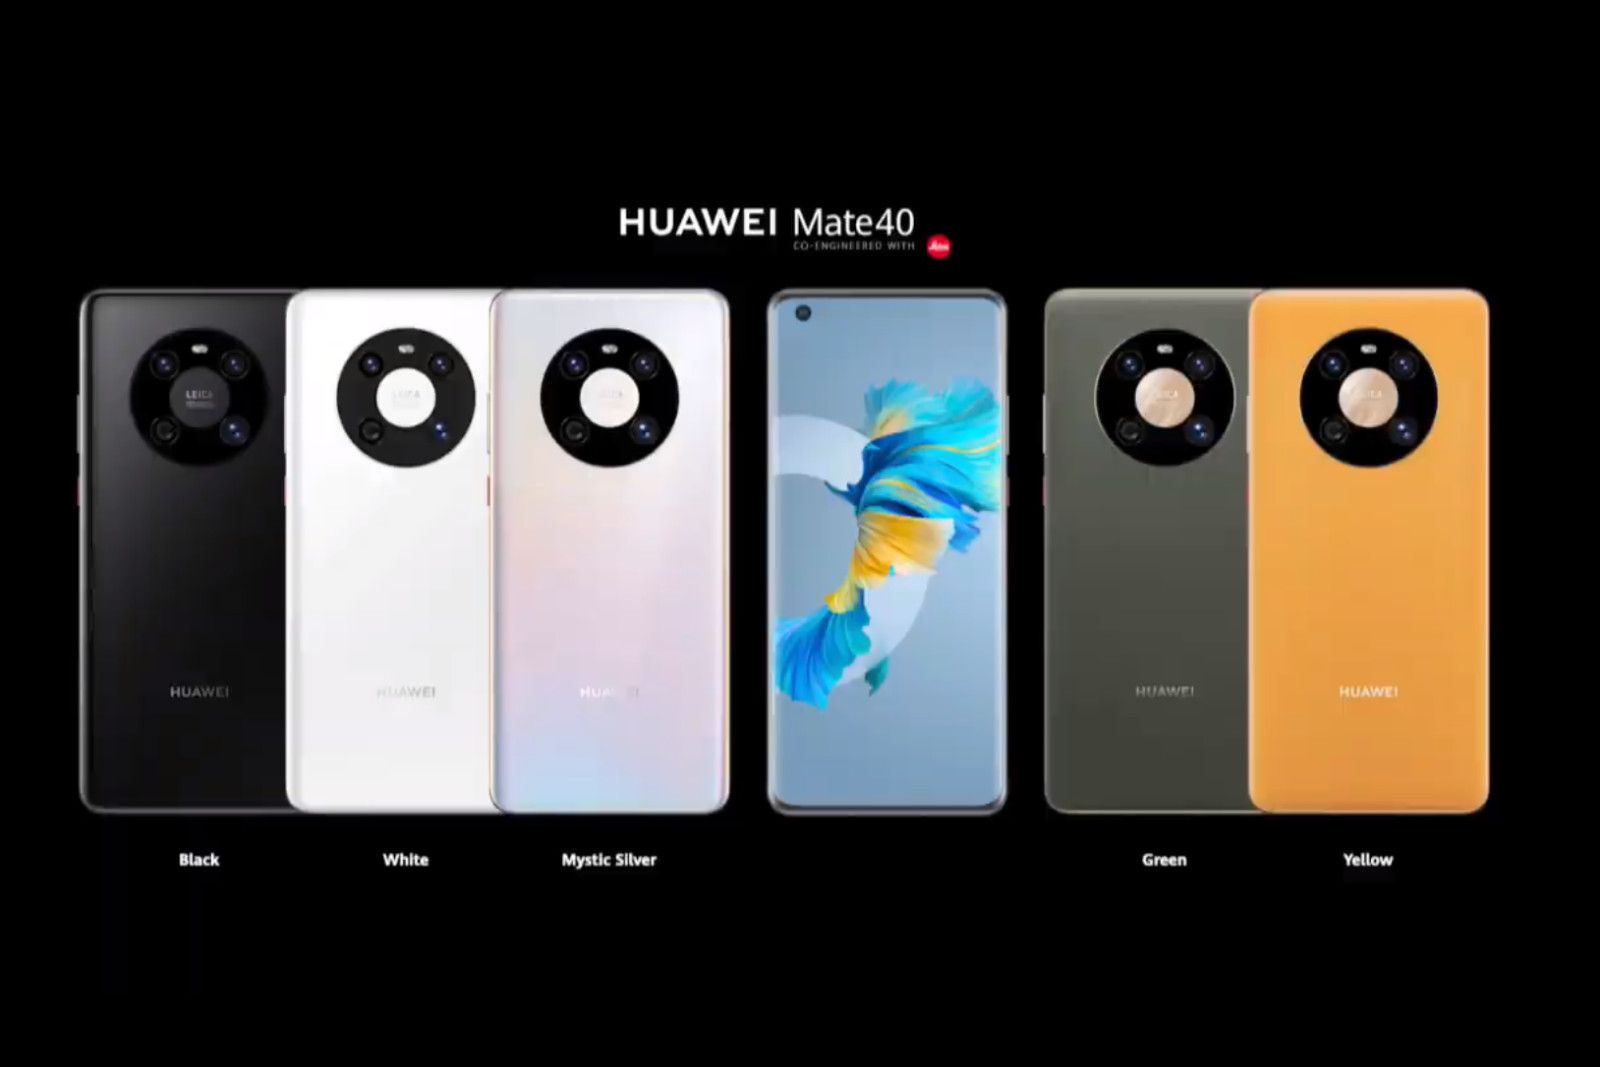 Huawei Mate 40 Pro is official, comes with crazy fast charging and a waterfall display photo 4